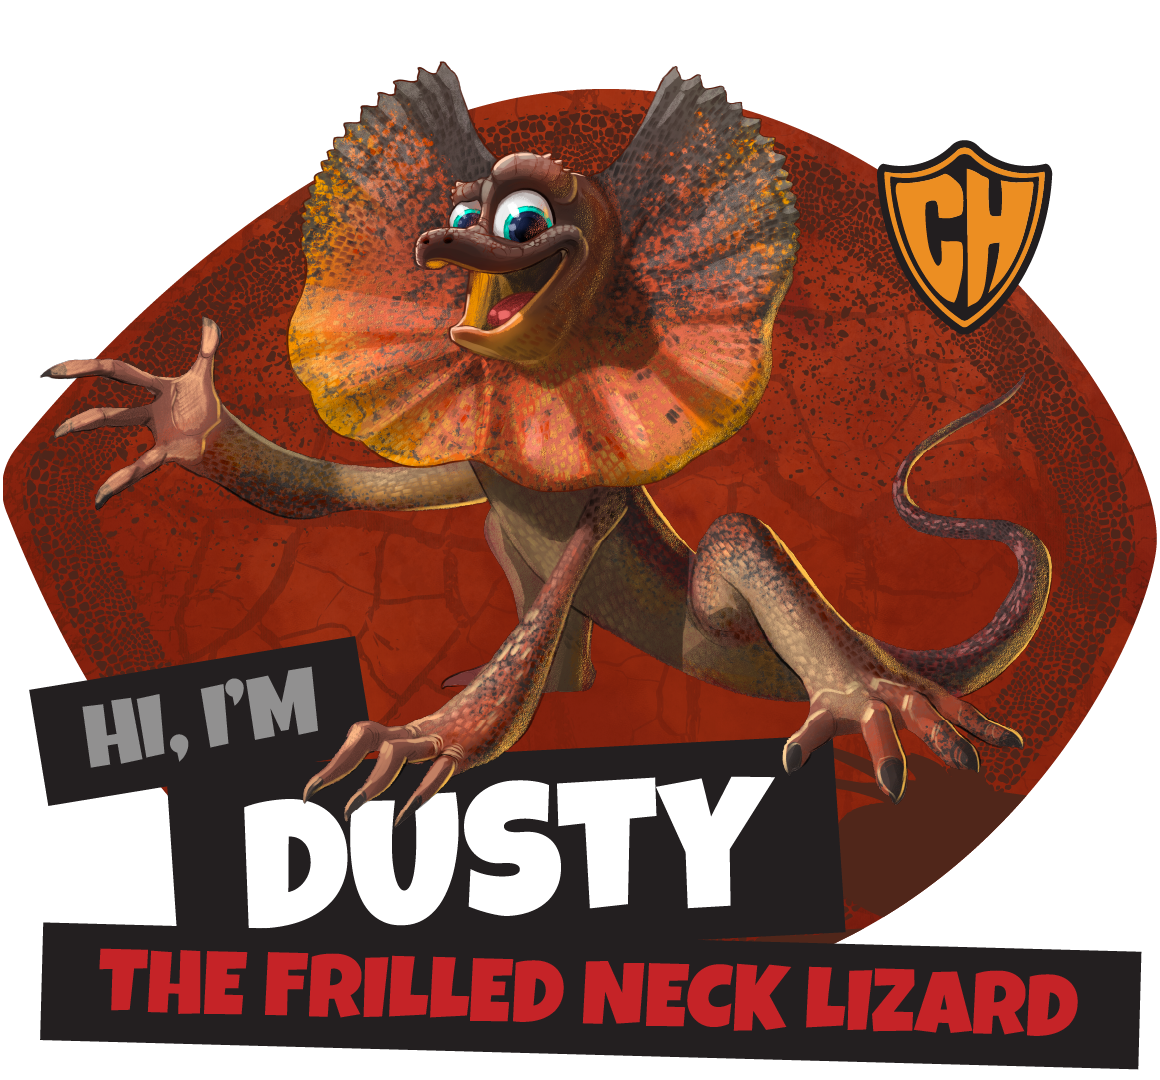 DUSTY THE FRILLED NECK LIZARD 